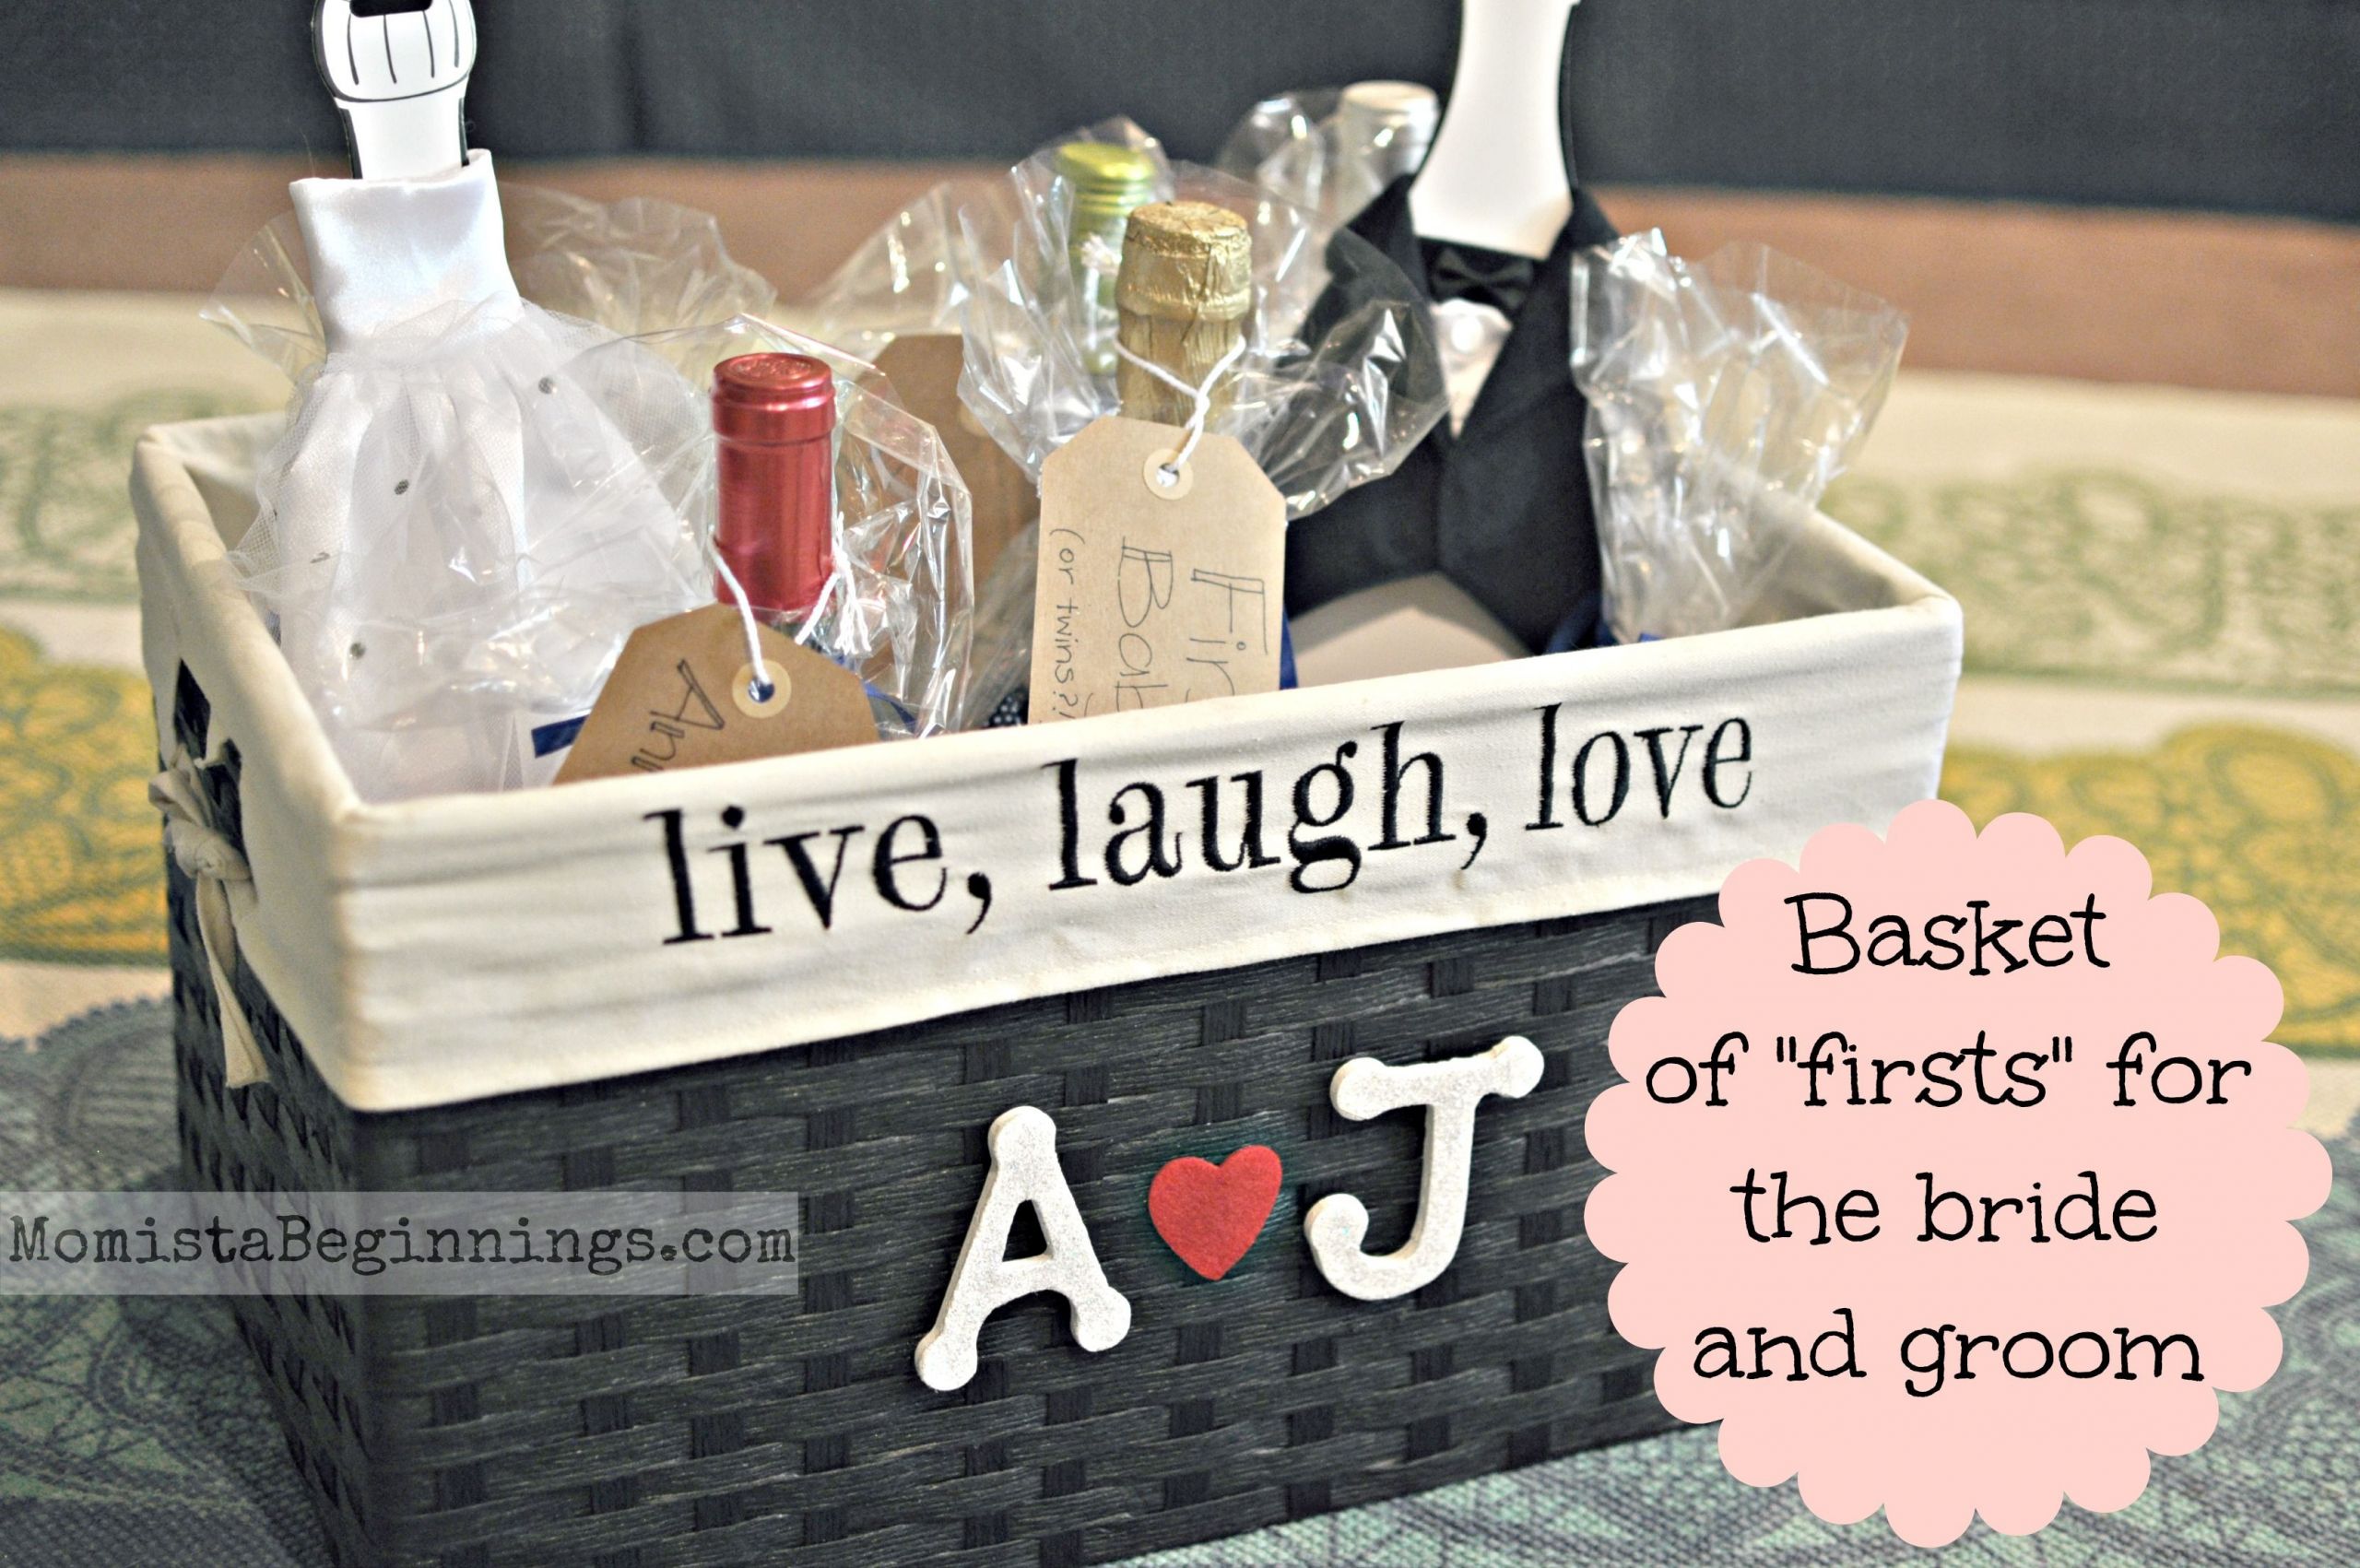 Wedding Gift Ideas For Bridegroom
 Basket of "firsts" bridal shower t This idea includes